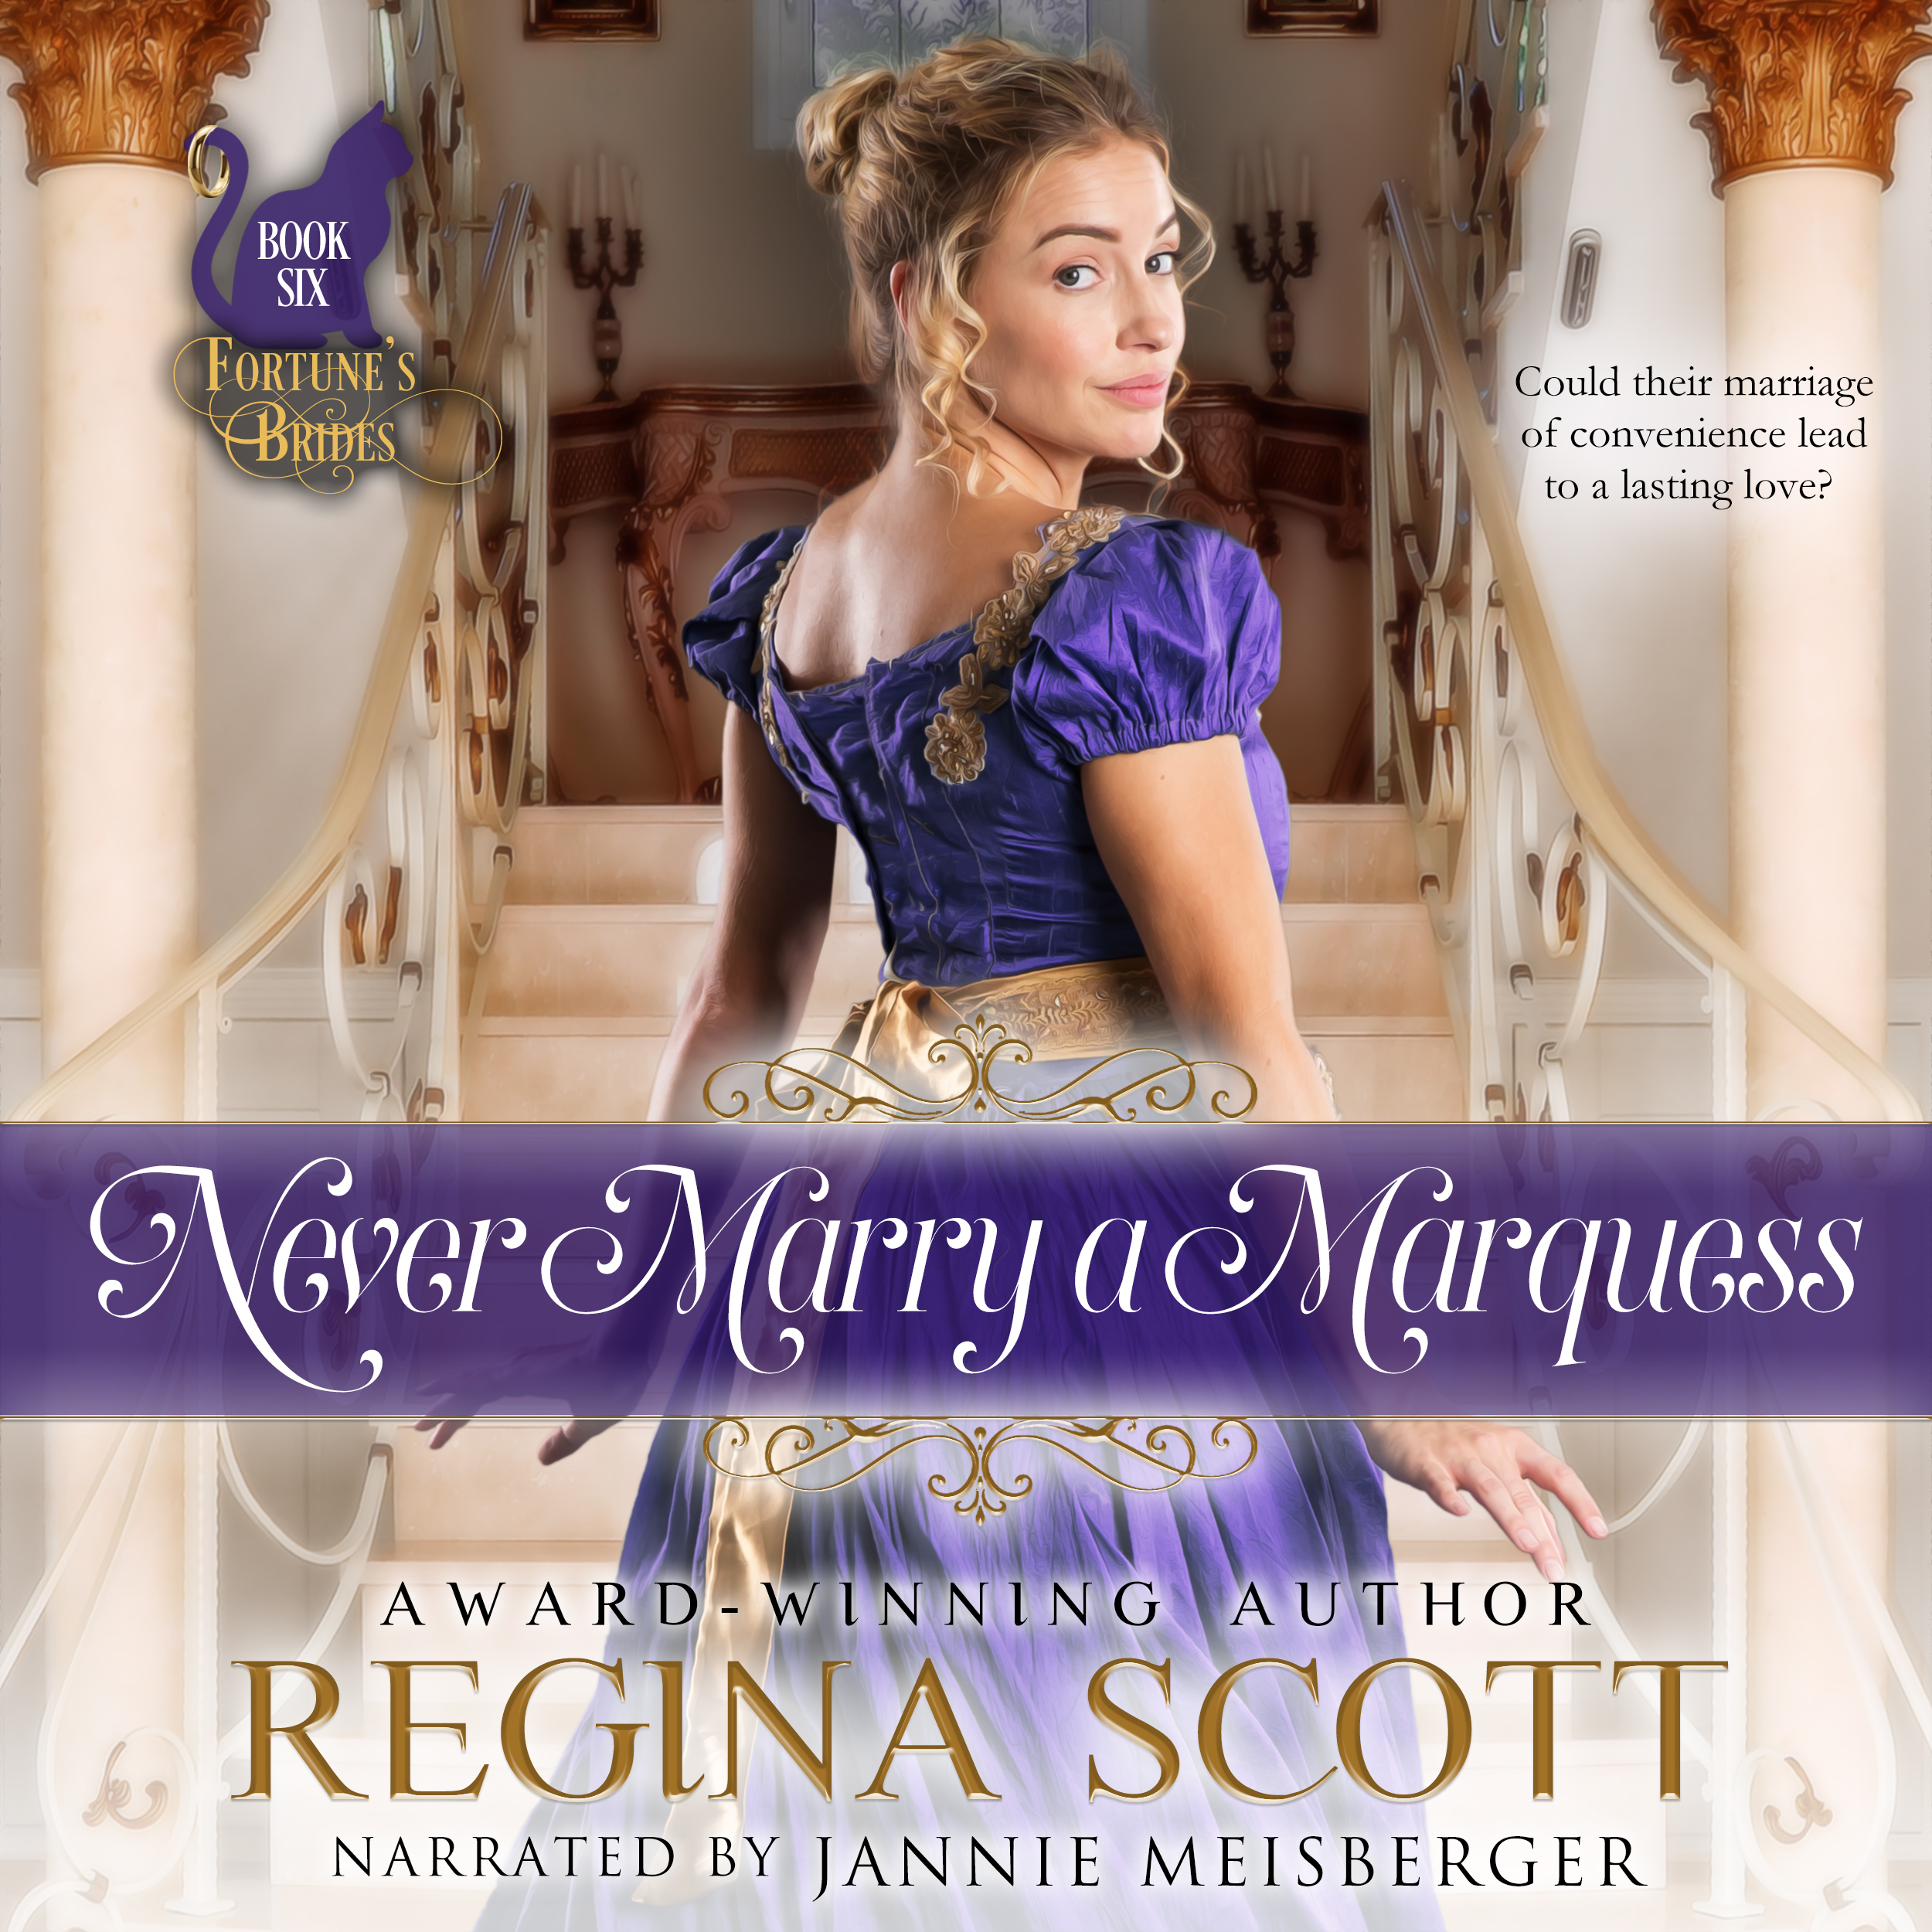 audio book for Never Marry a Marquess by Regina Scott, book 6 in the Fortune's Brides series